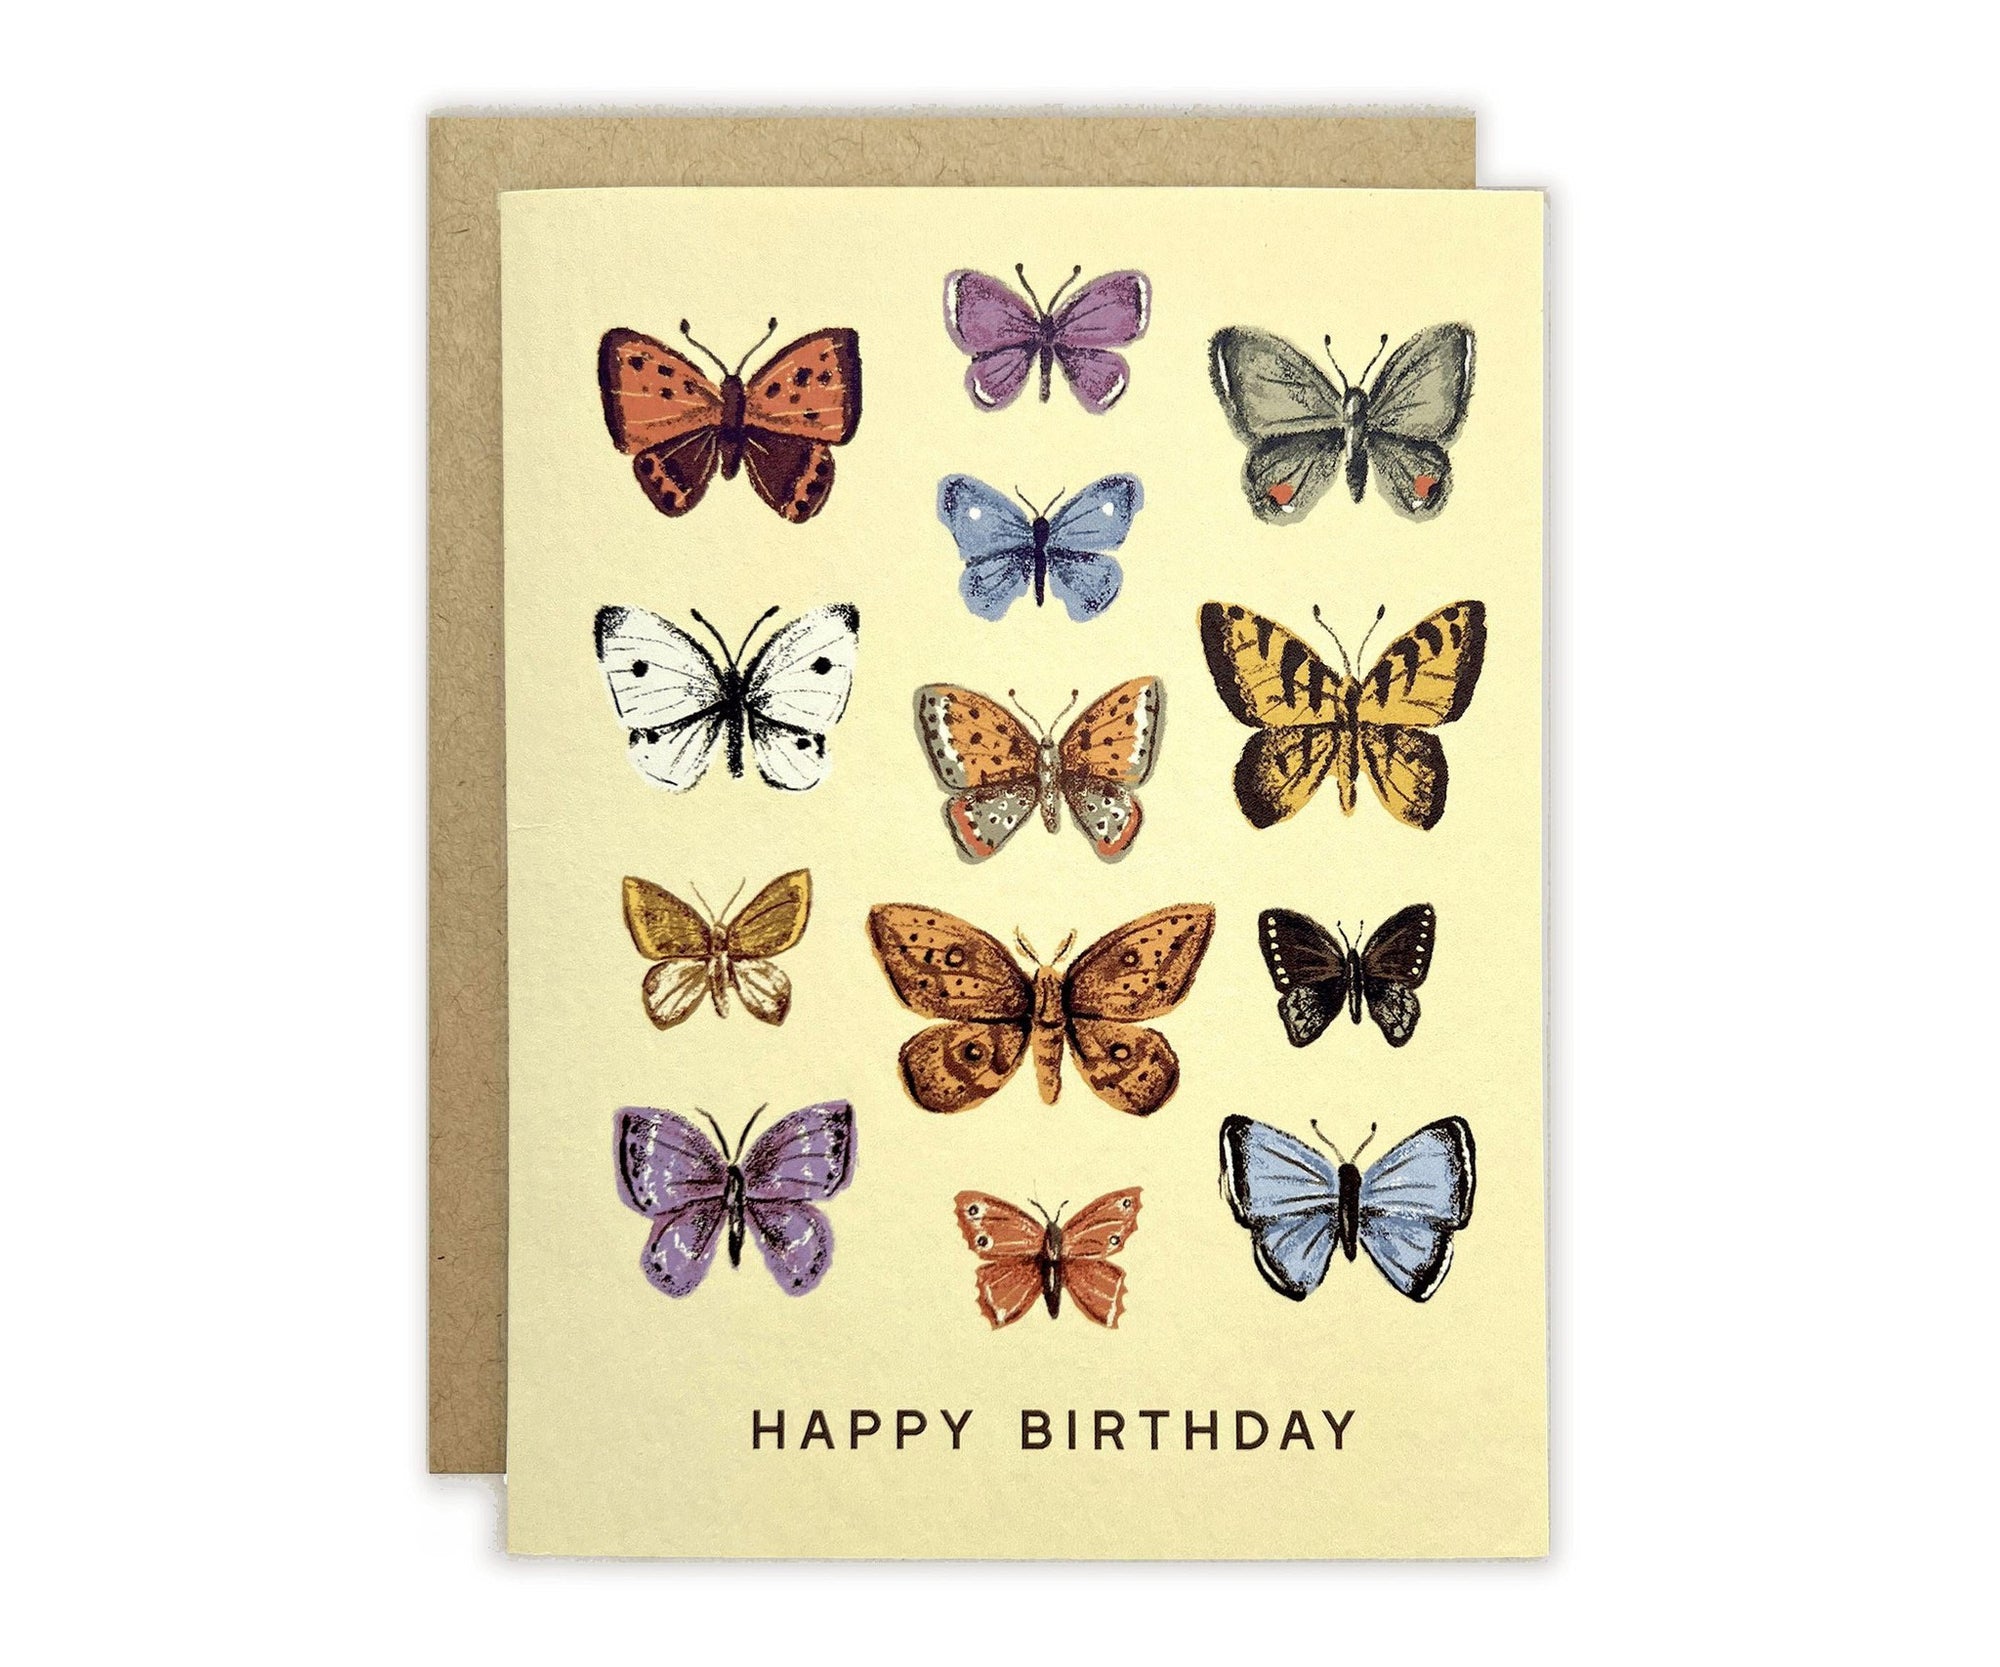 A Butterfly Birthday Greeting Card with butterflies on it from The Wild Wander.